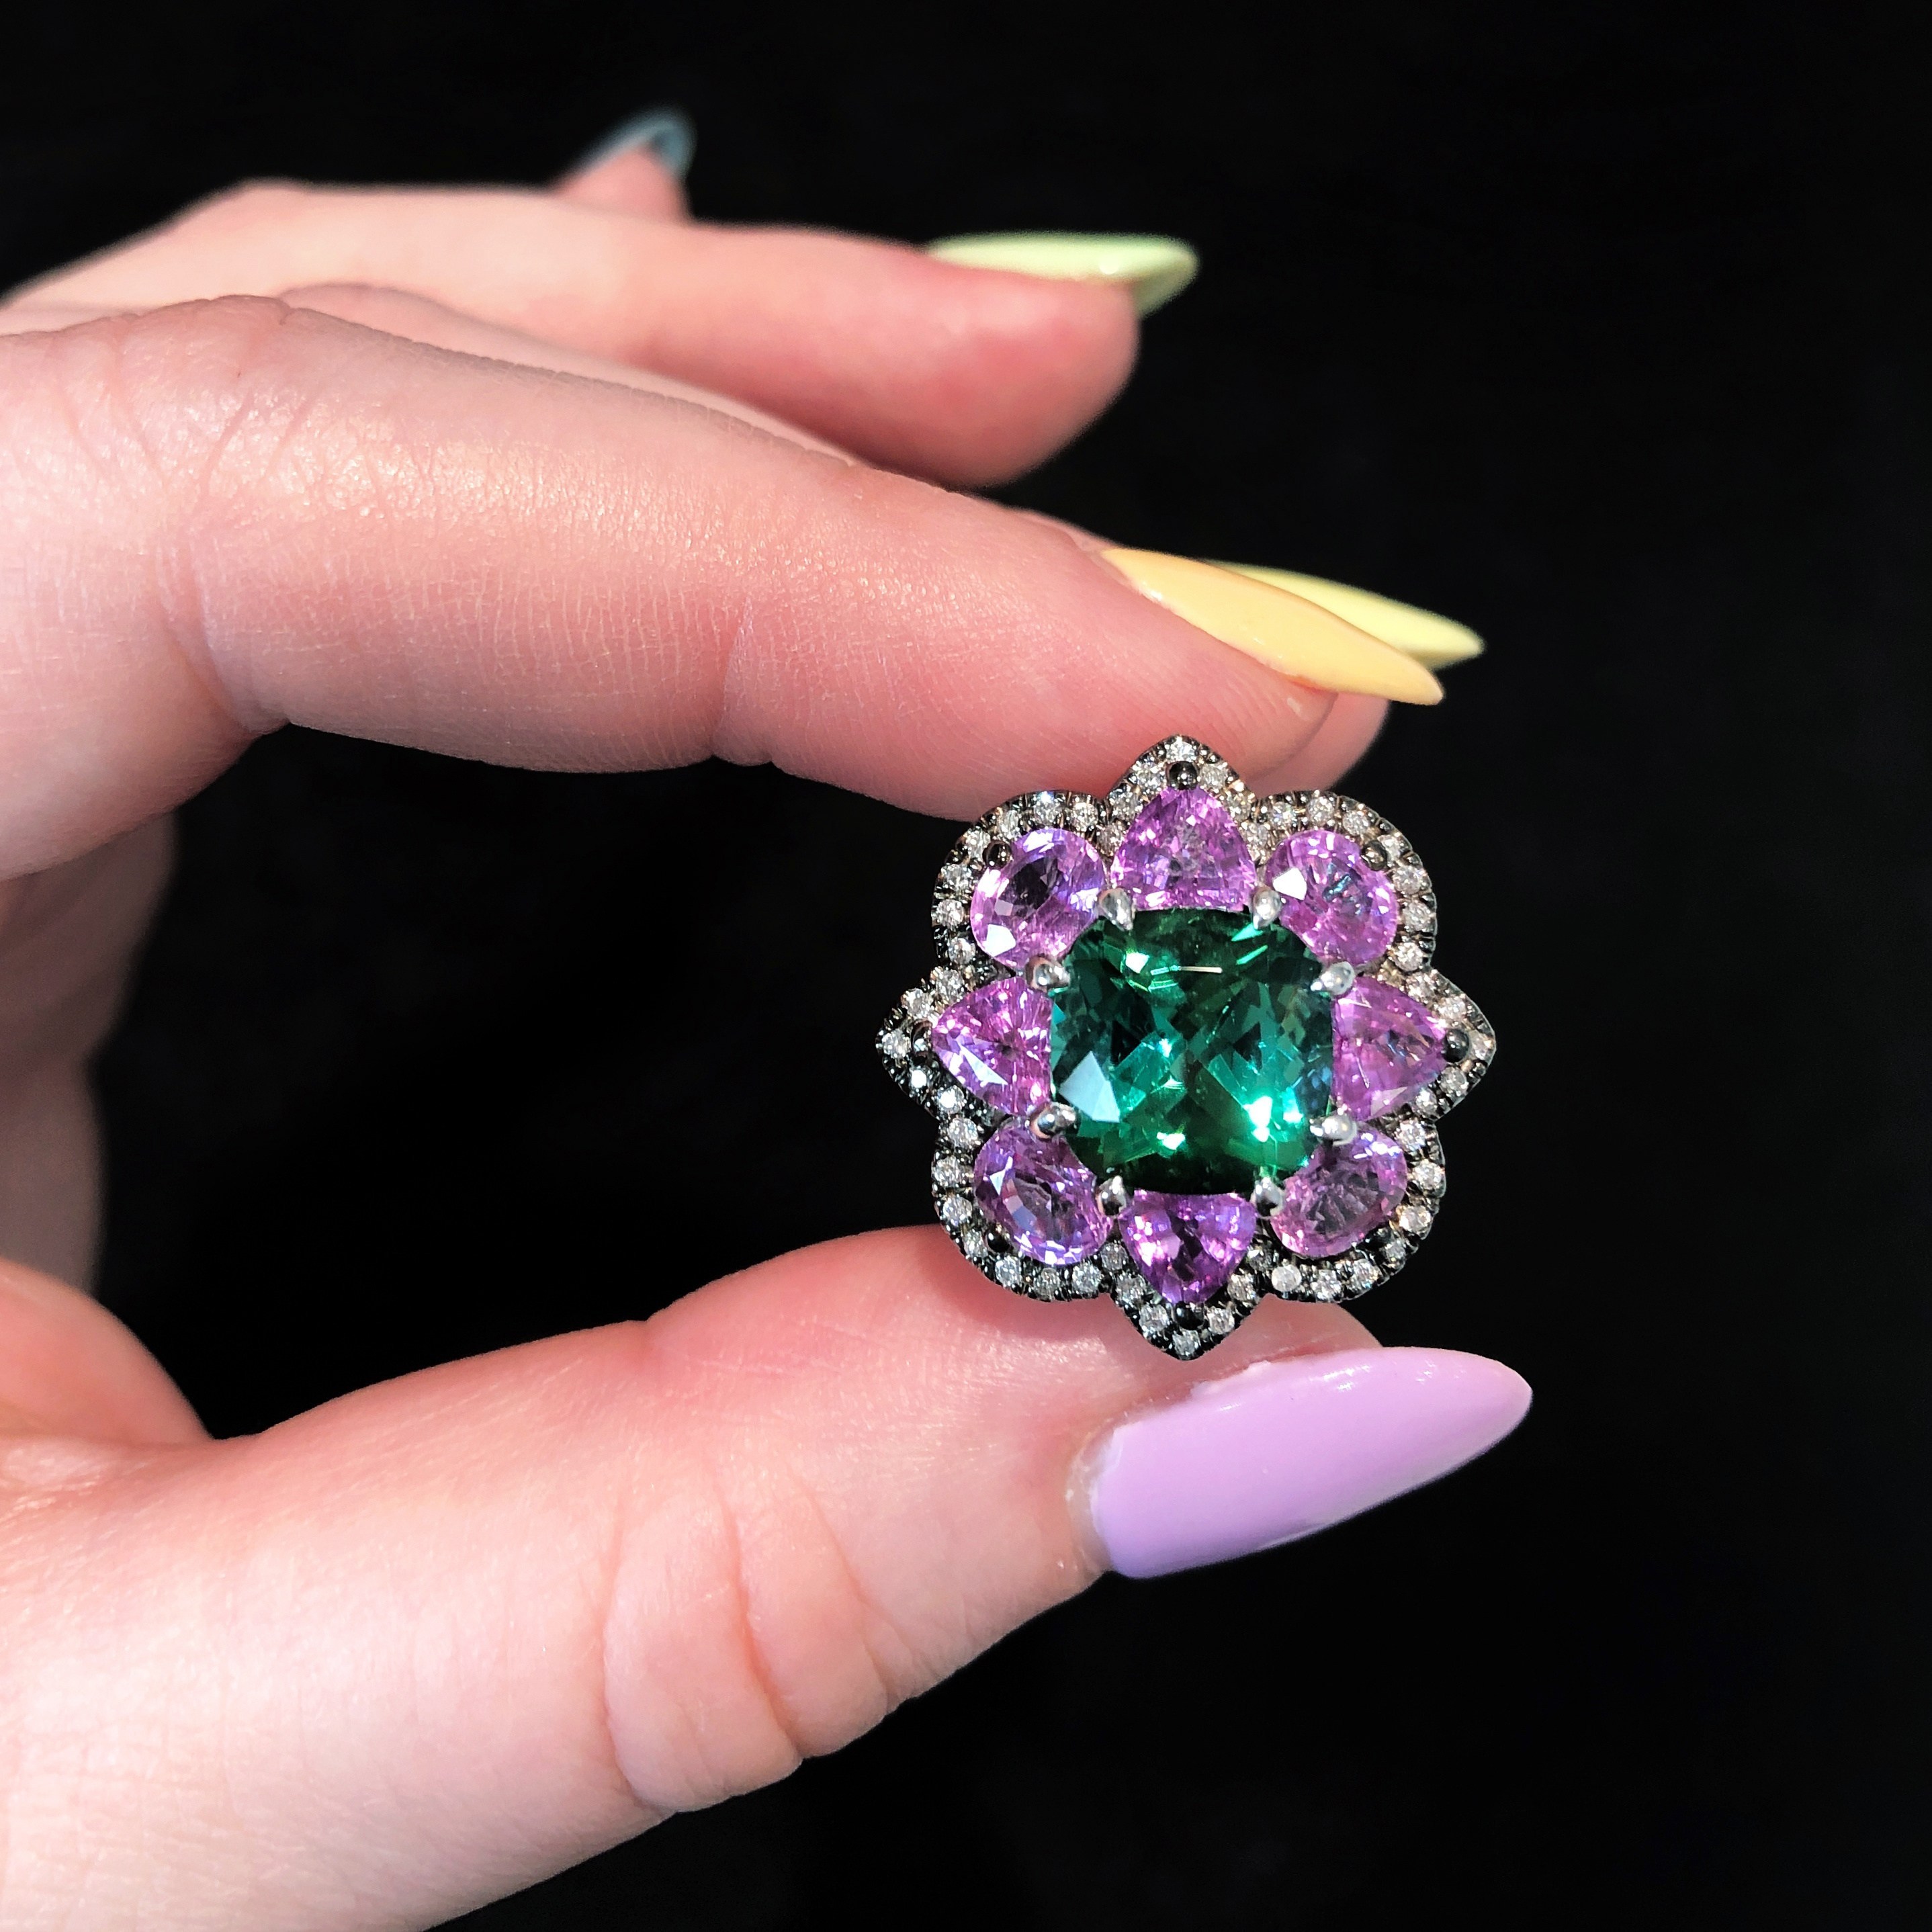 A beautiful tourmaline, sapphire, and diamond ring by Campbellian Collection. Spotted at AGTA GemFair 2019.